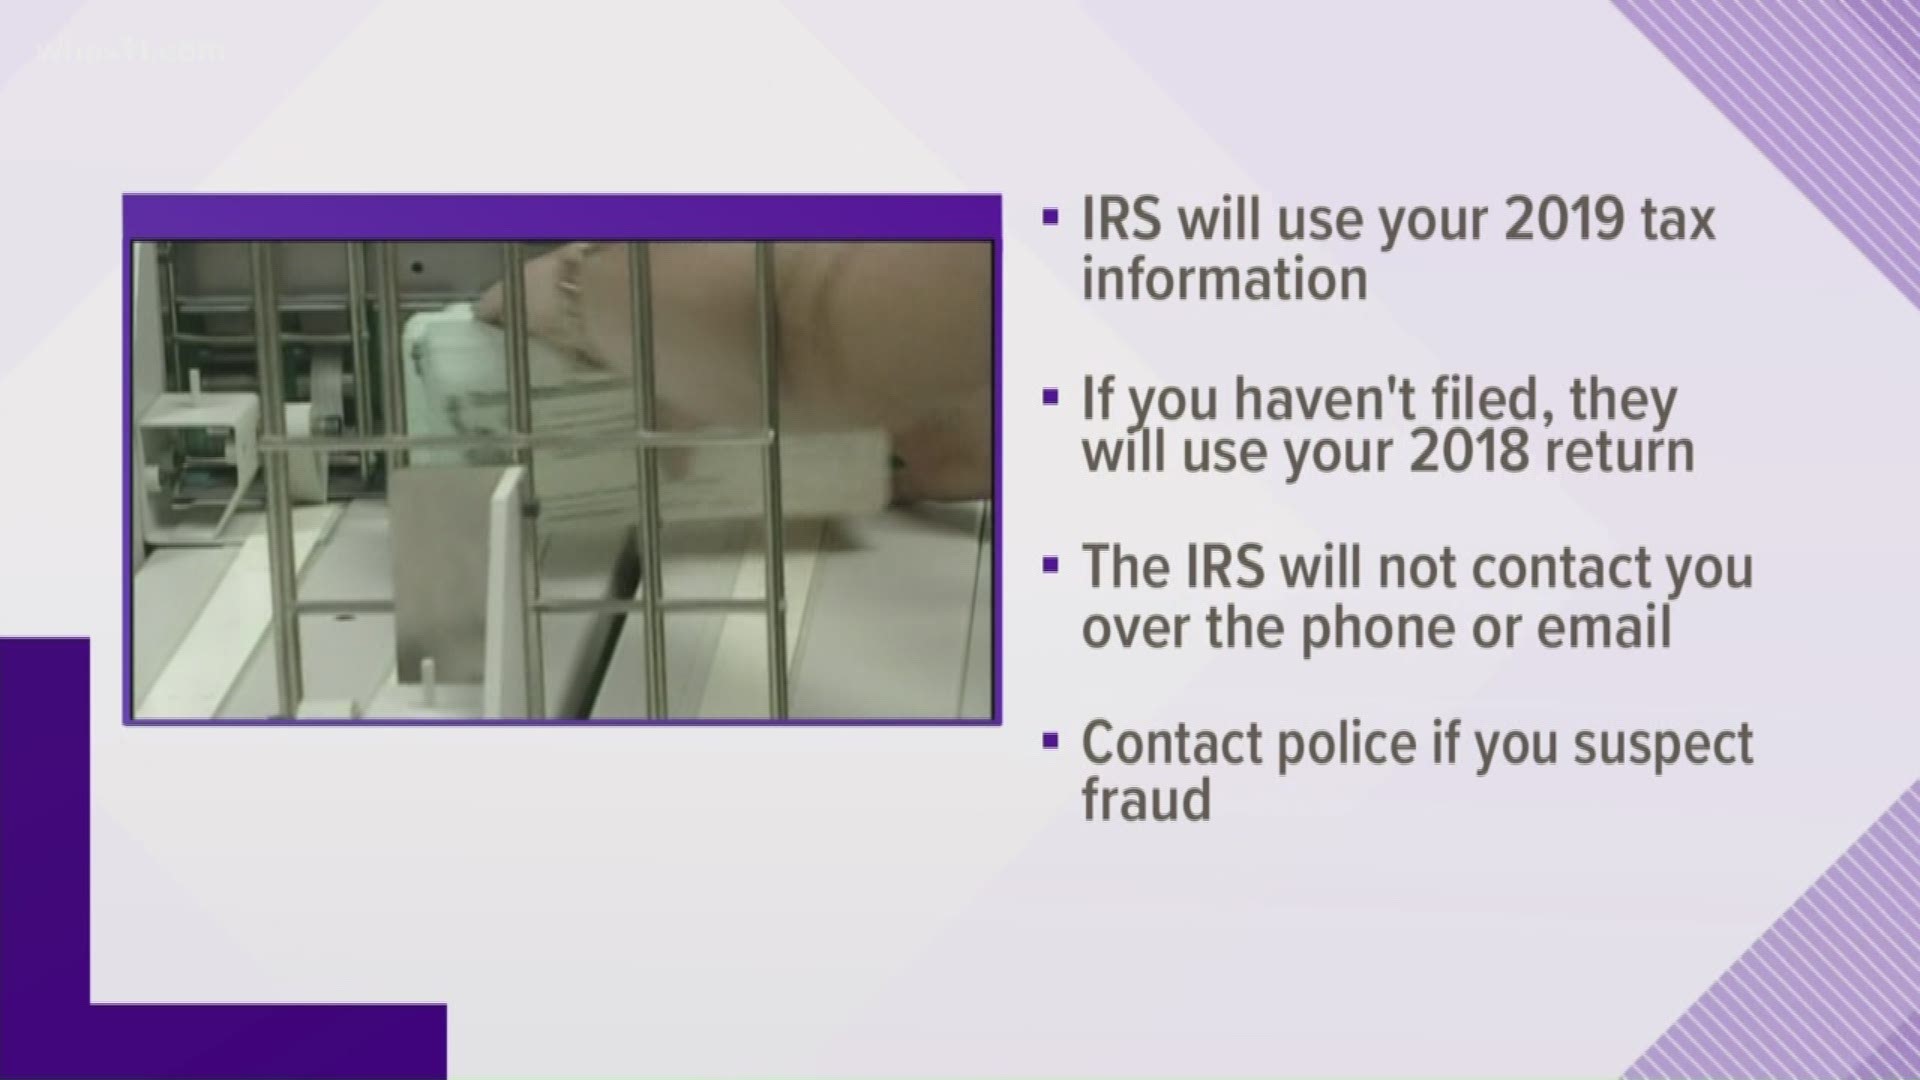 Indiana state police are warning about potential scams. Here's what you need to know.